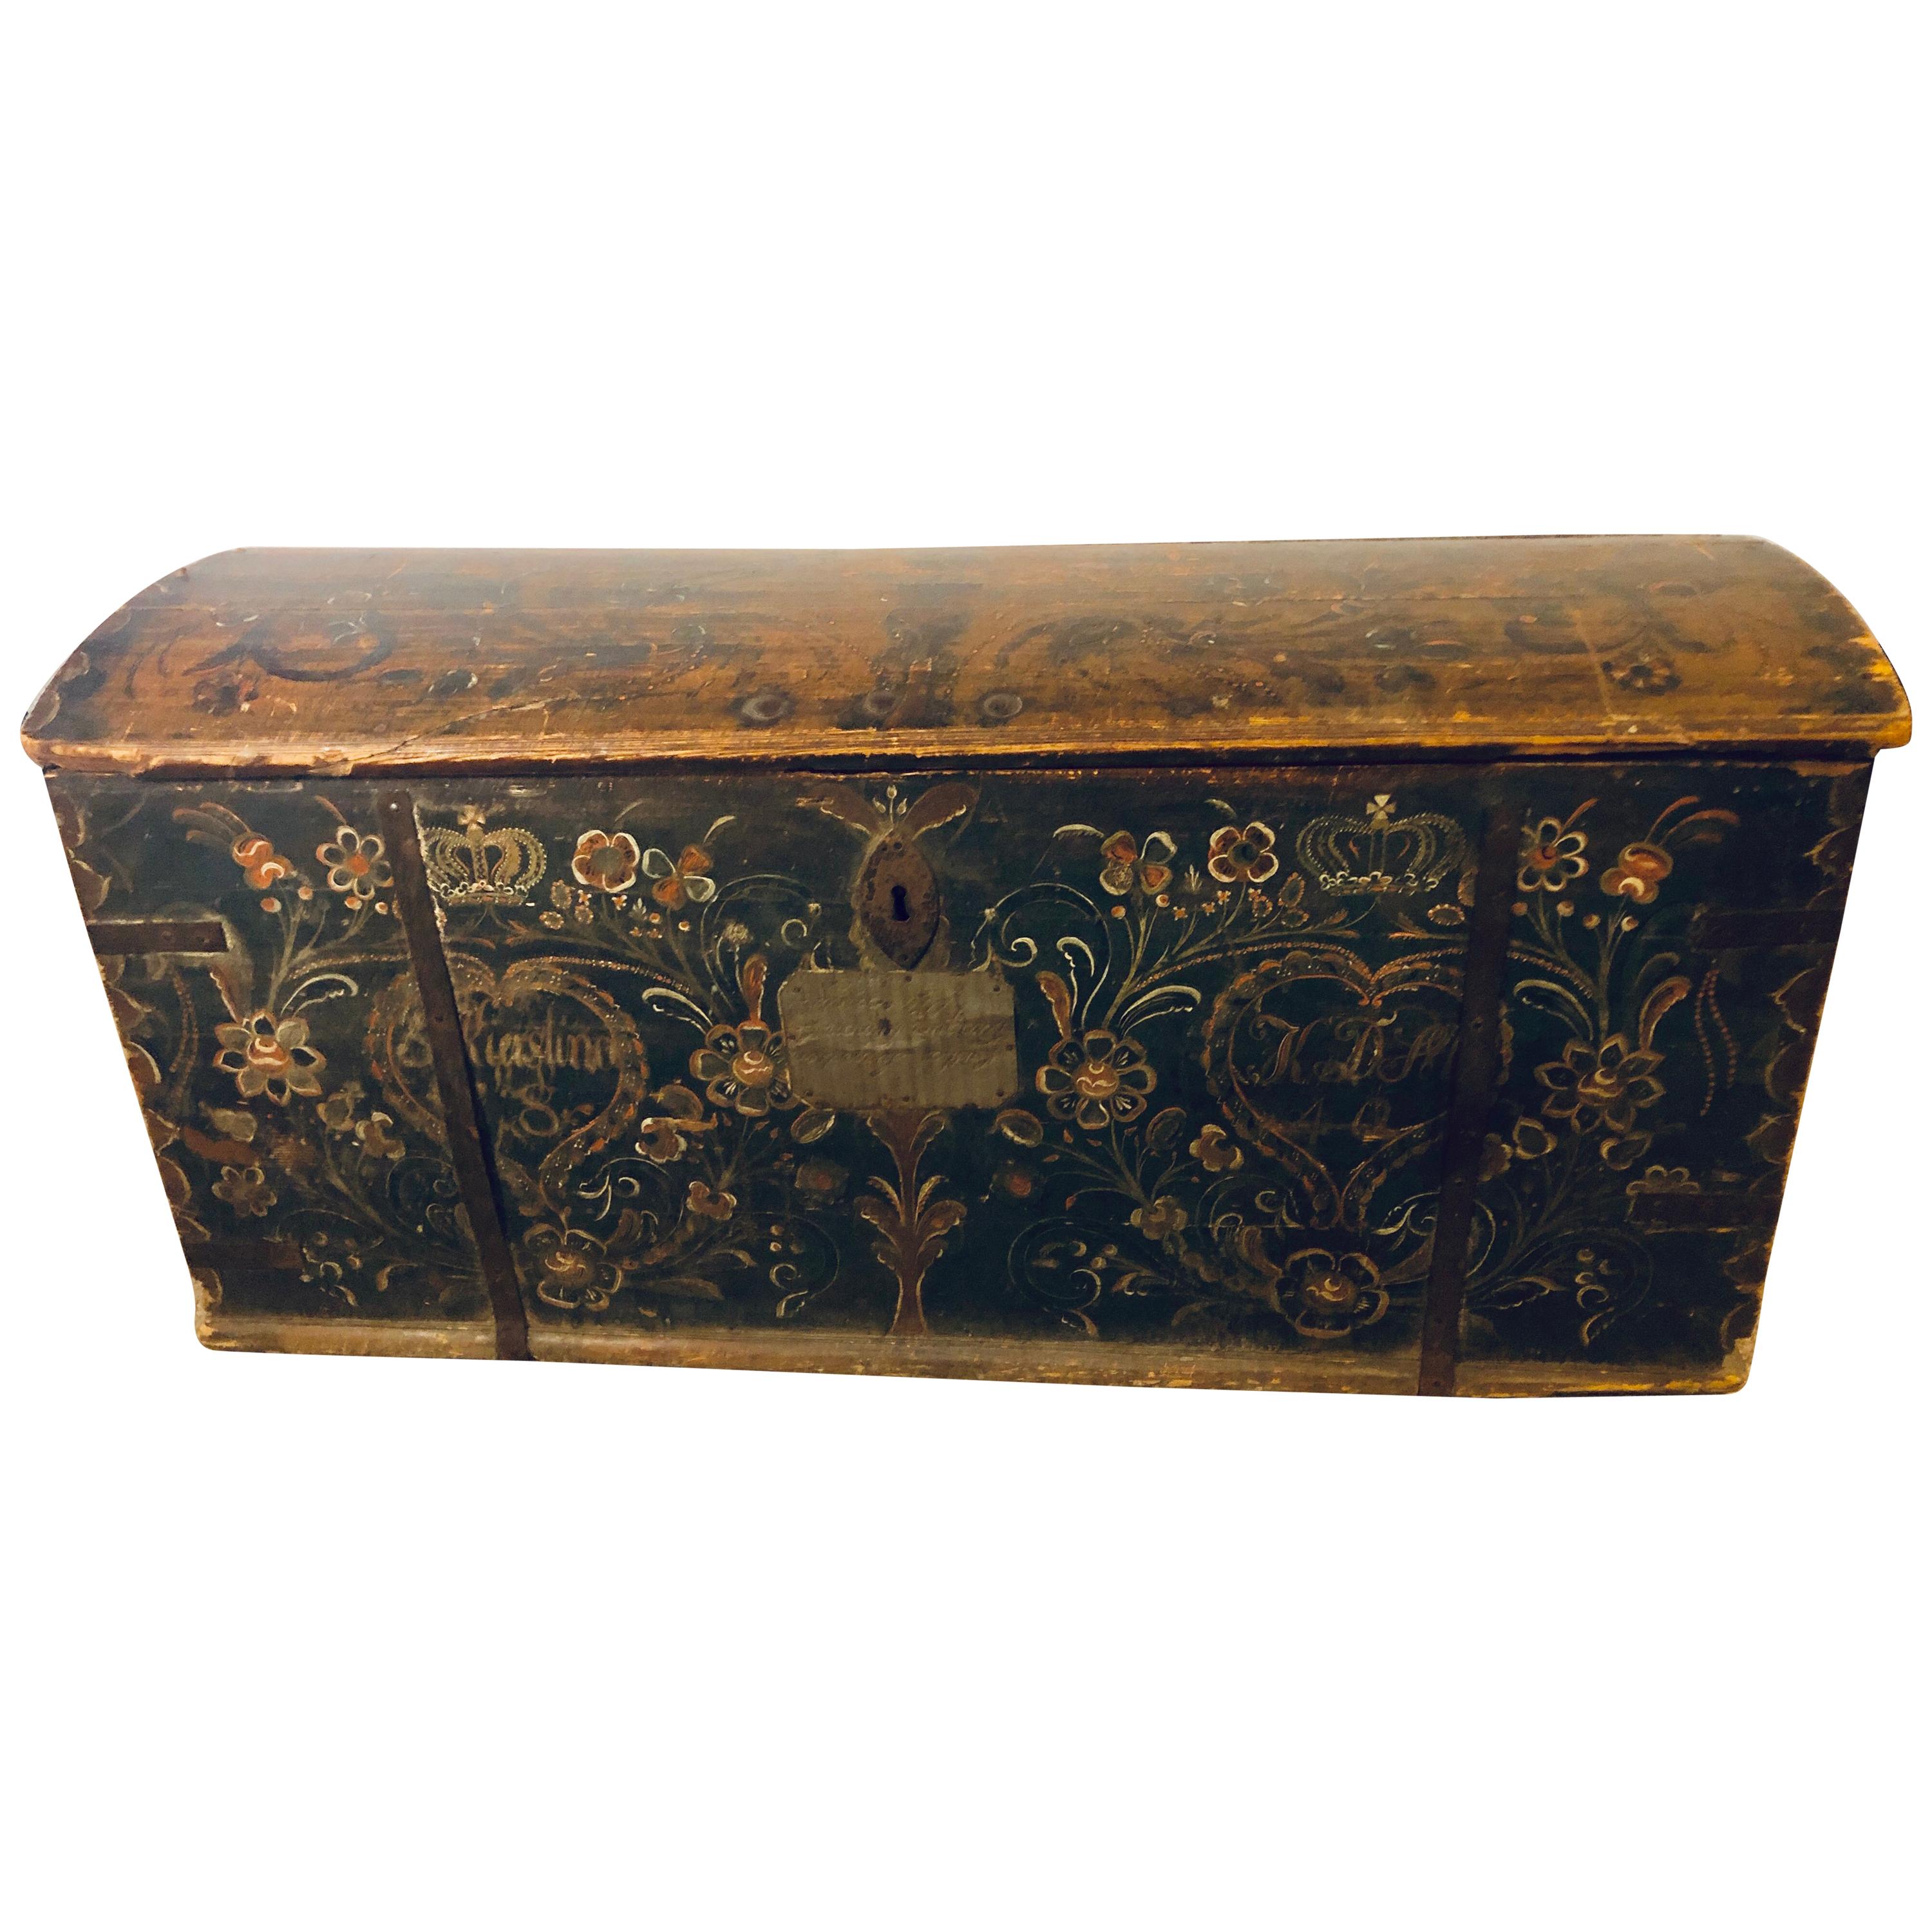 Original Painted Dowry Chest Trunk or Luggage, Dated 1840 For Sale